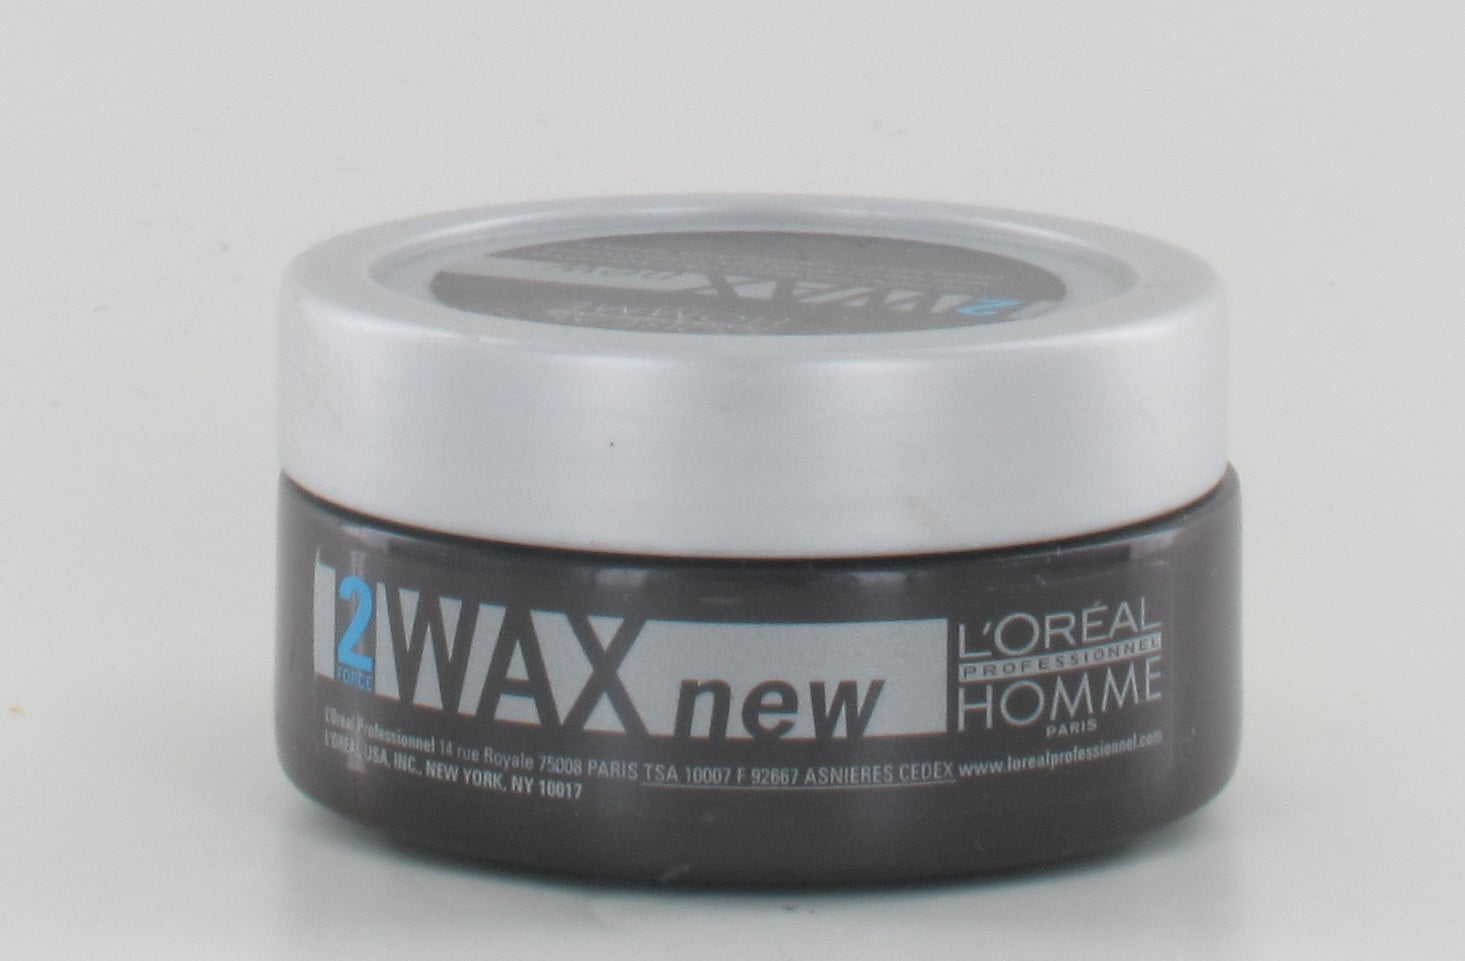 Loreal Homme 2 Shine and Definition Wax 1.7 Oz